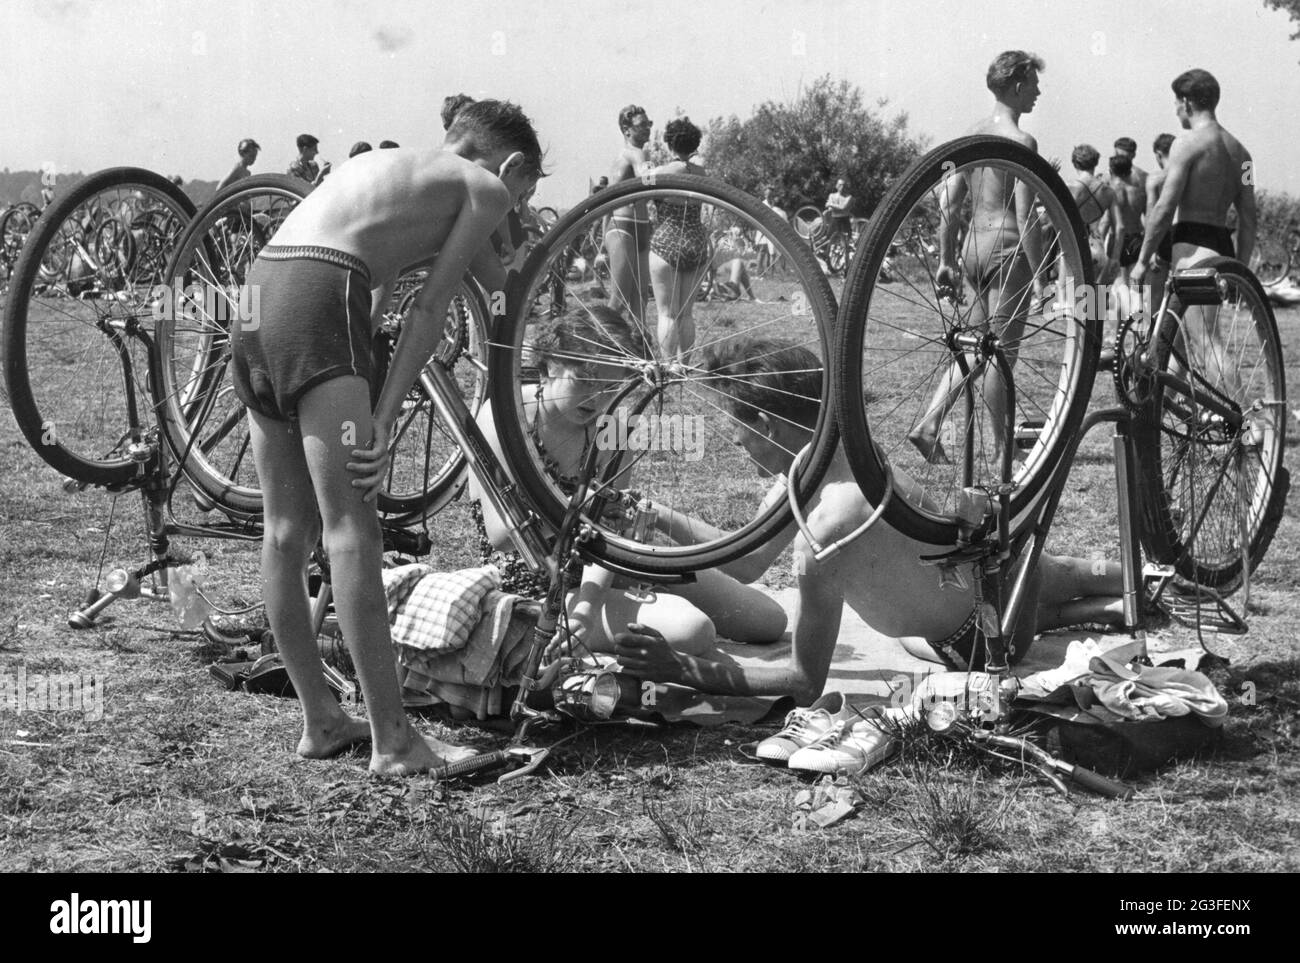 leisure time, lawn at lake, couple behind upside down bicycles lying on blanket, Berlin, Germany, ADDITIONAL-RIGHTS-CLEARANCE-INFO-NOT-AVAILABLE Stock Photo